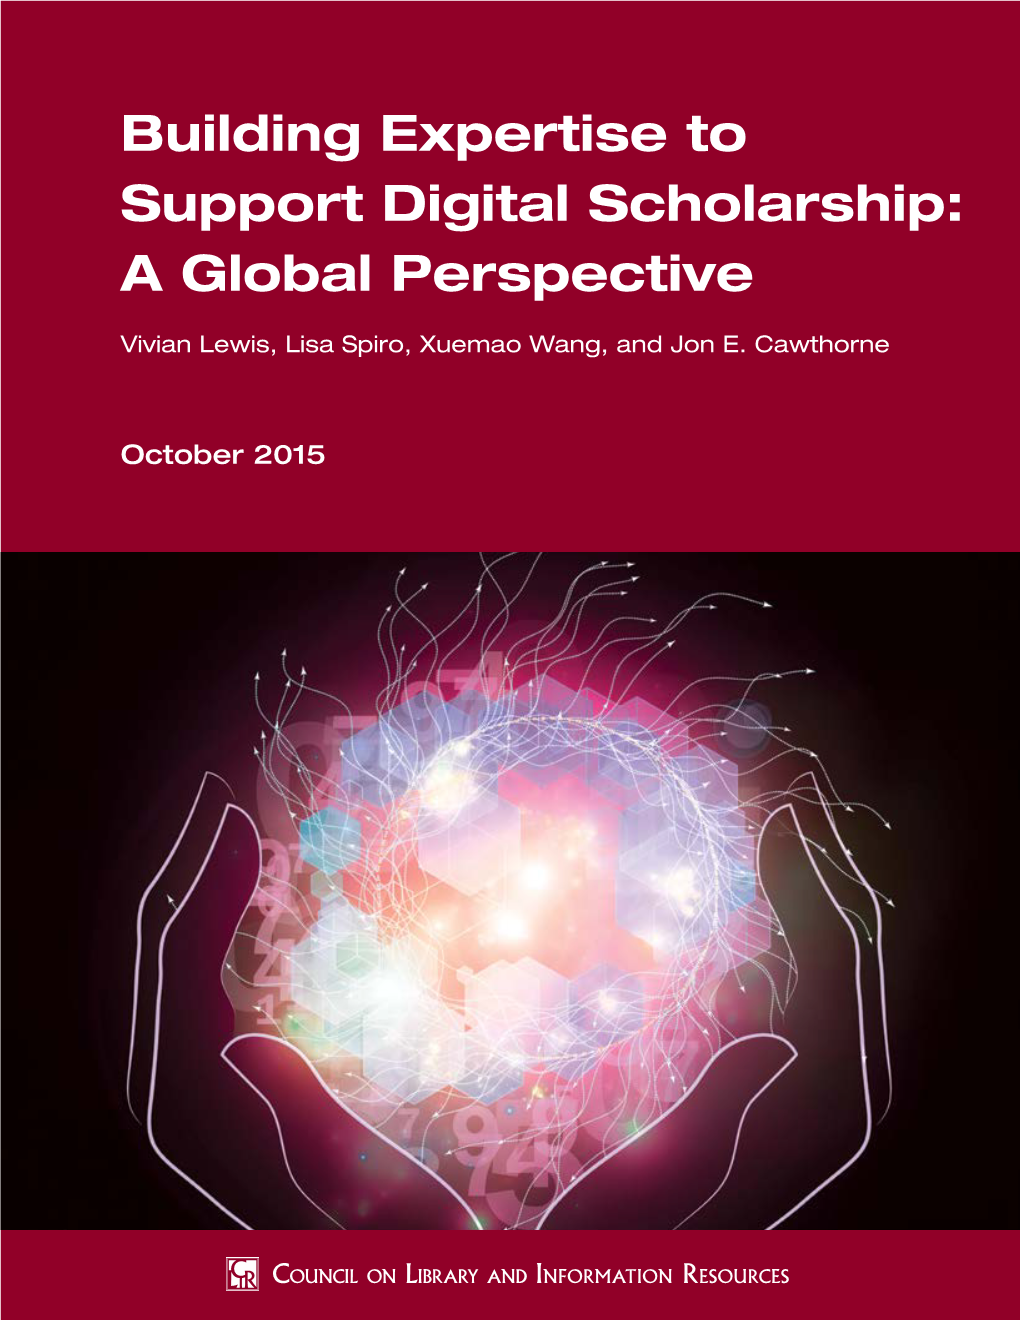 Building Expertise to Support Digital Scholarship: a Global Perspective